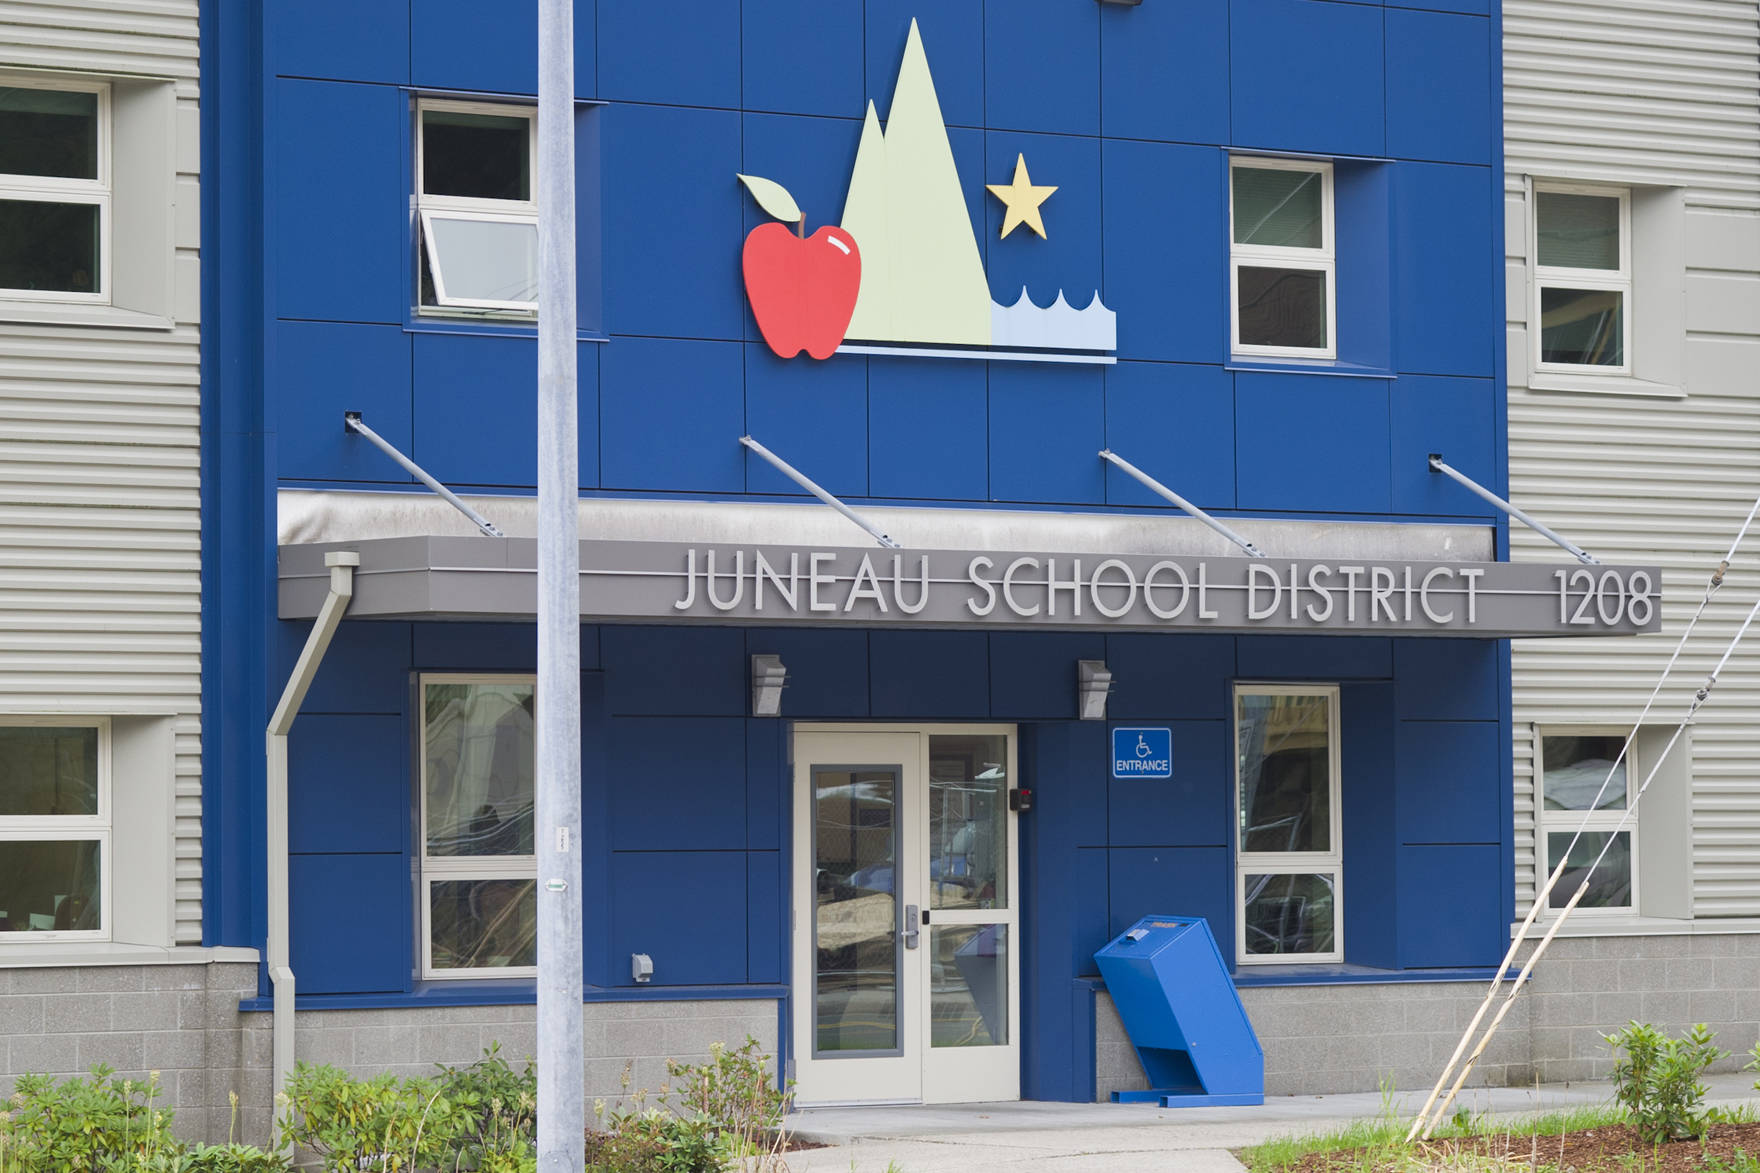 The Juneau School District’s administration building is at the corner of Glacier Avenue and 12th Street. (Michael Penn | Juneau Empire)